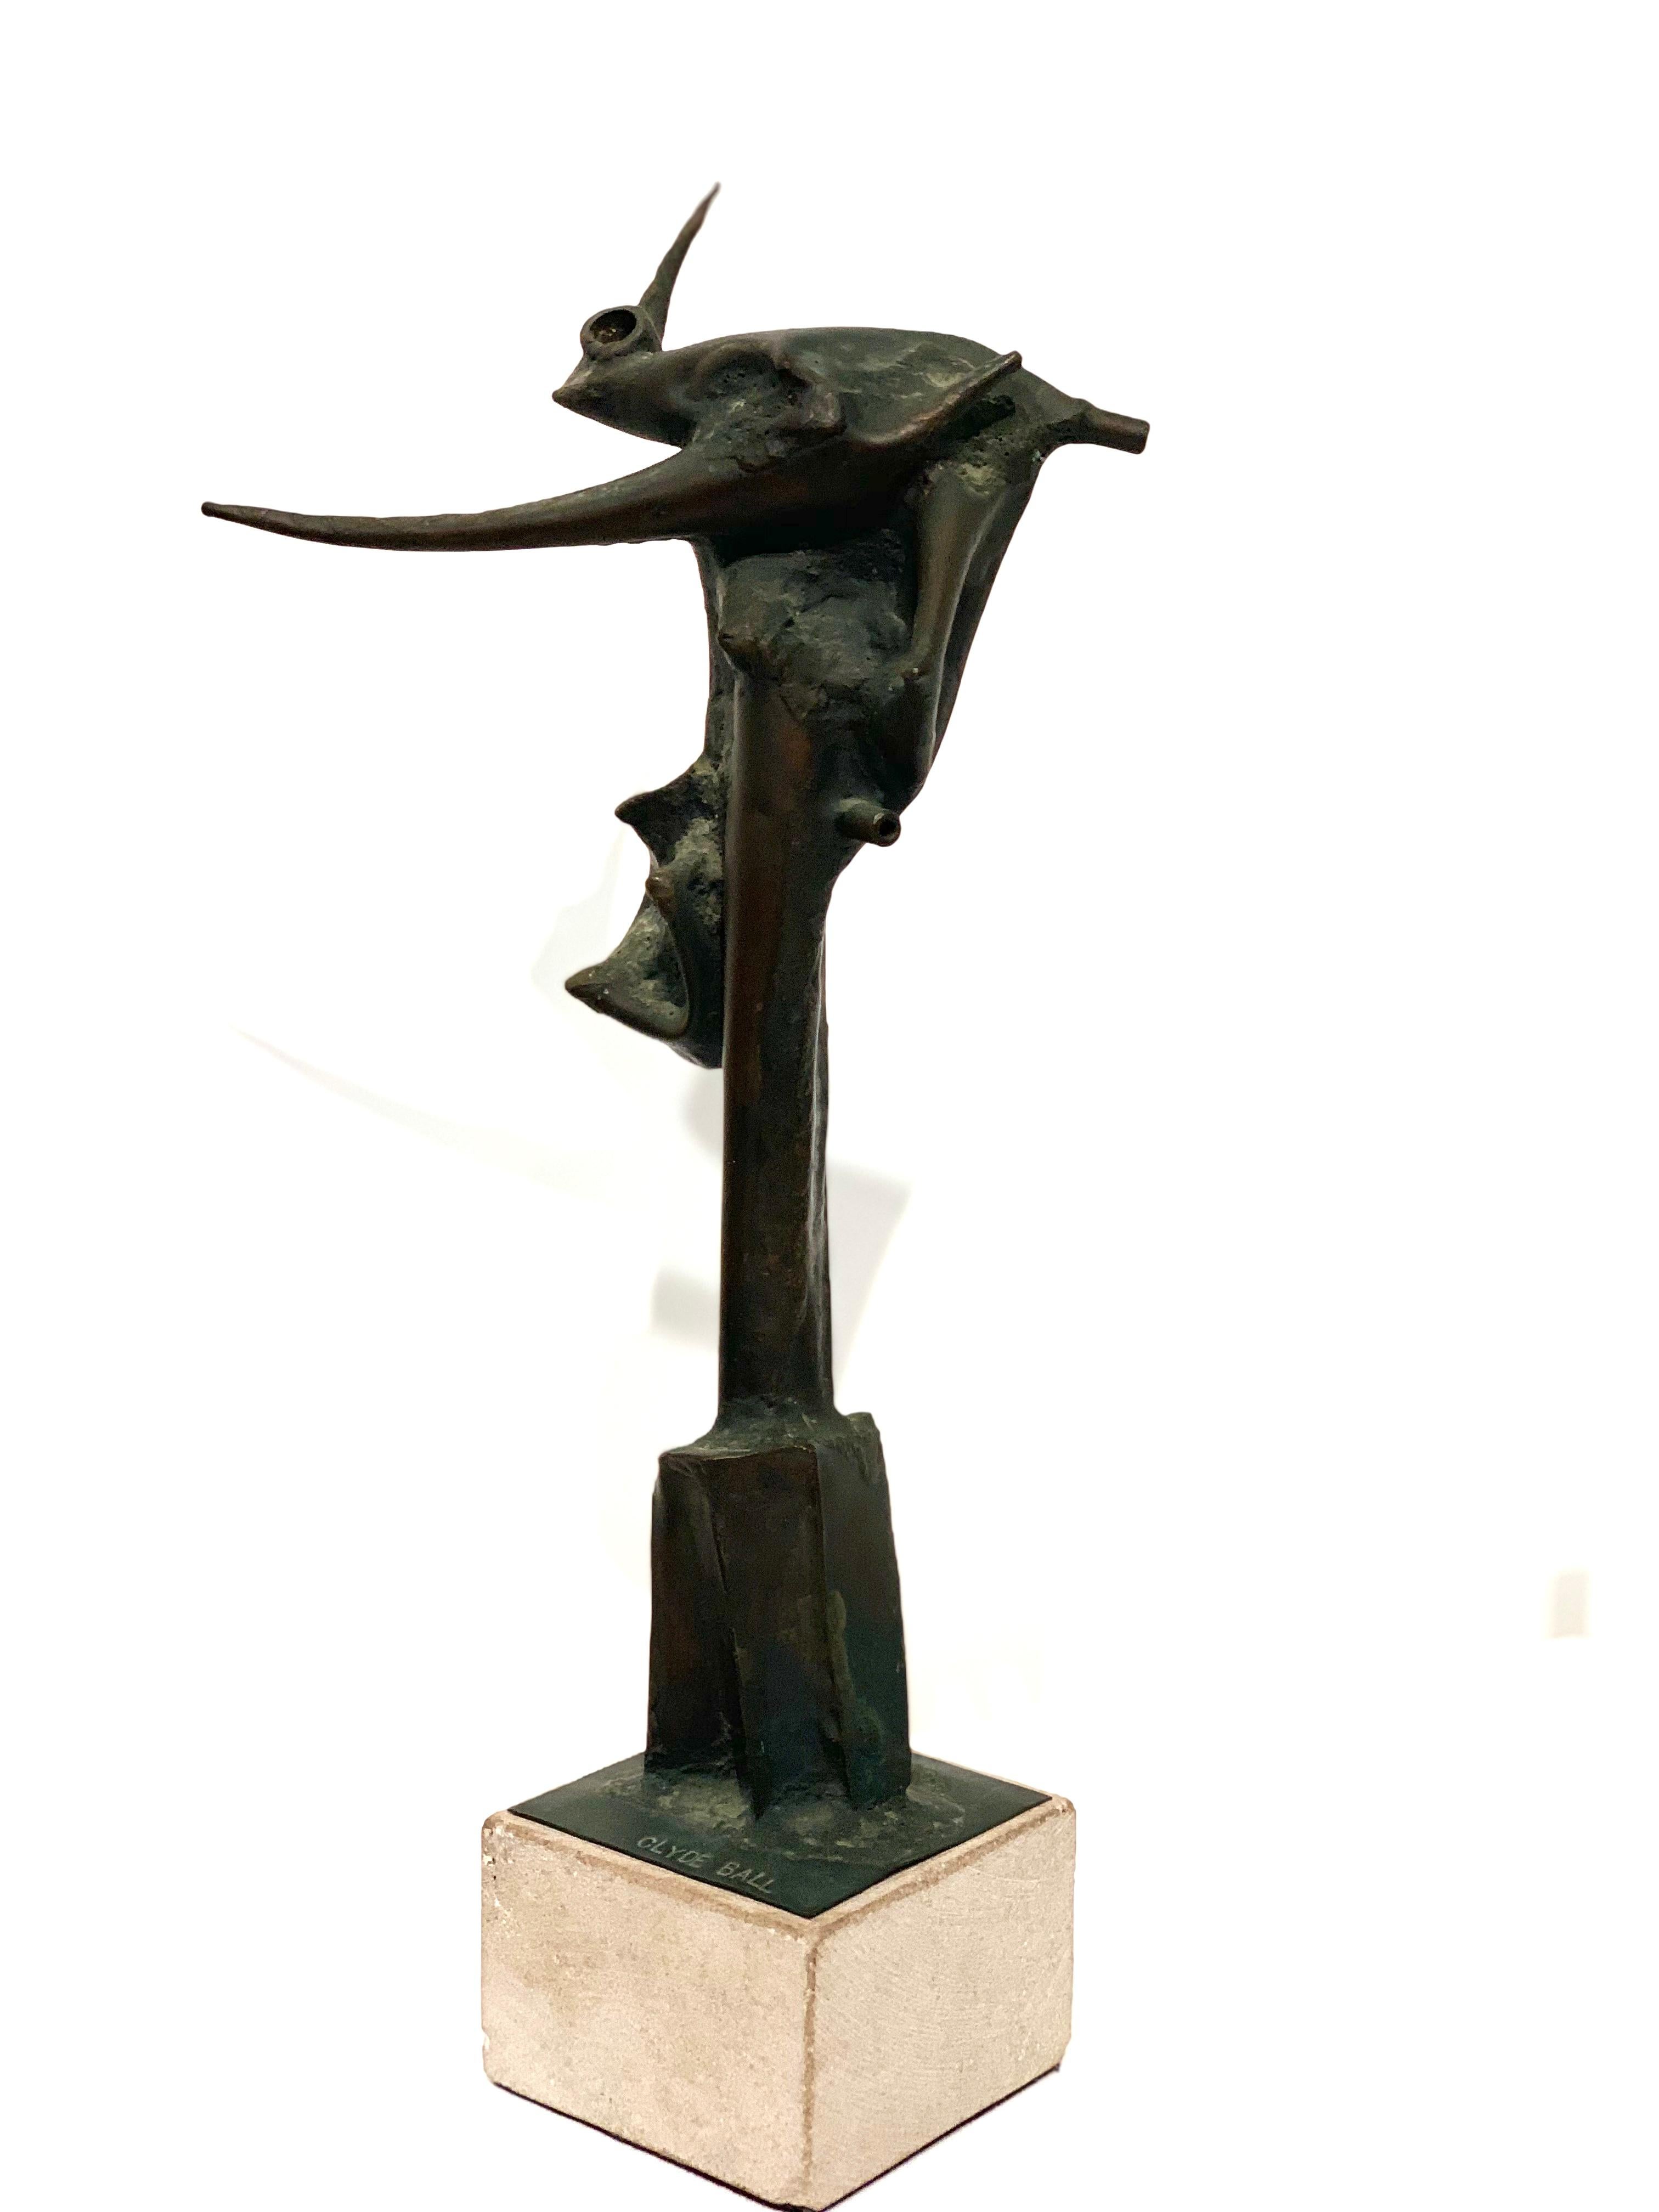 Untitled - Abstract Sculpture by Clyde Ball